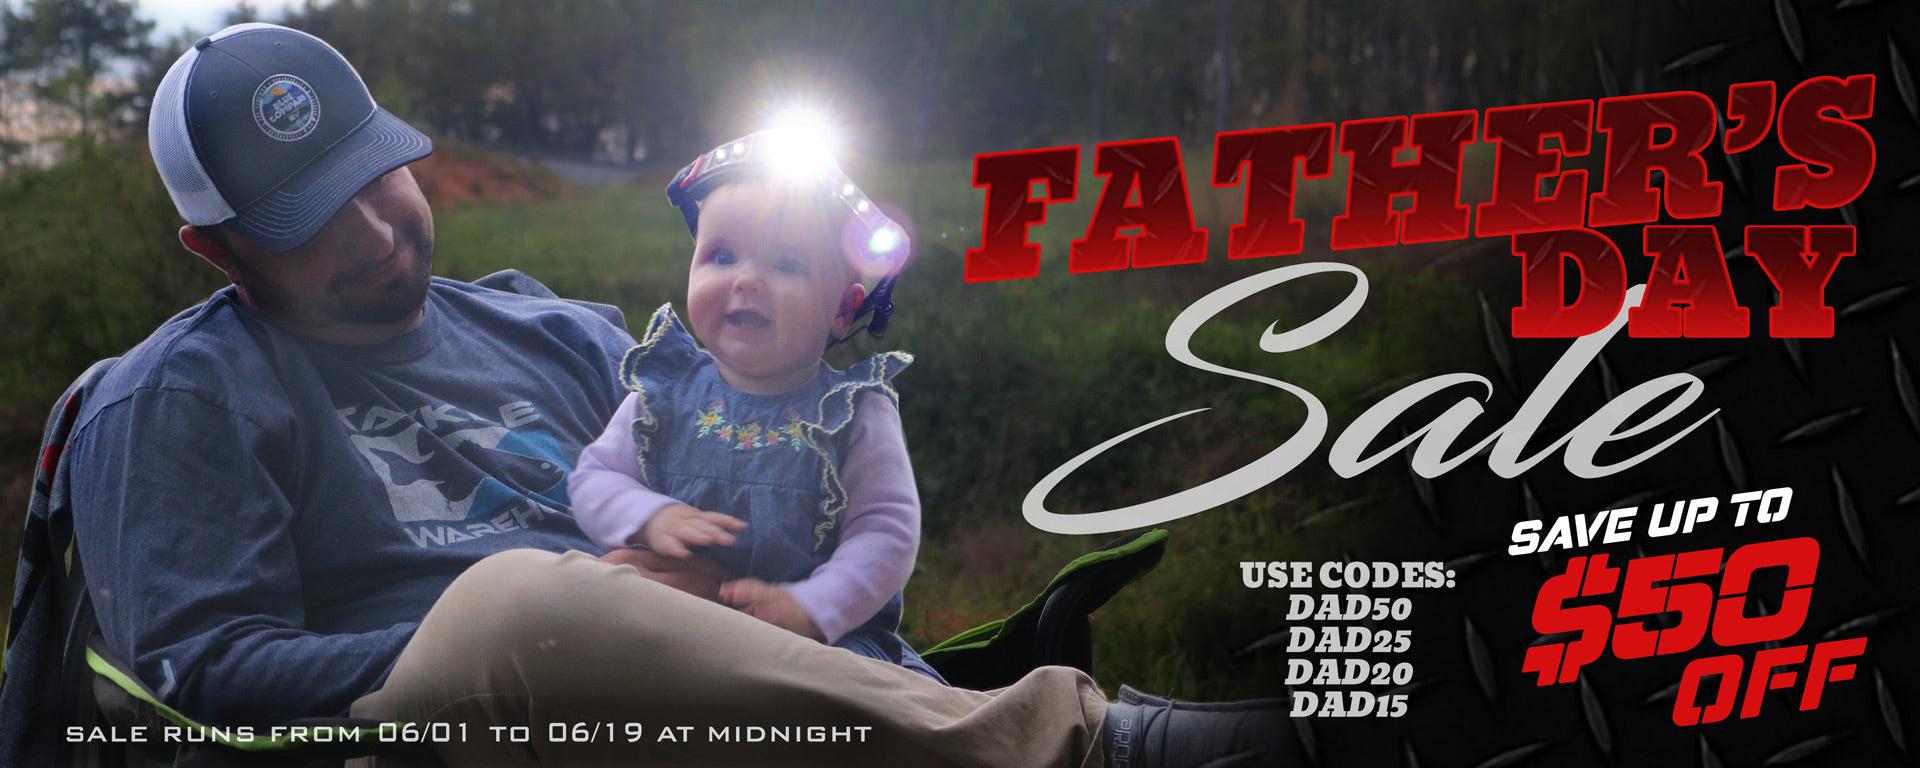 STKR FATHERS day sale desktop banner. Save up to $50 off. Use codes: DAD50, DAD25, DAD20, DAD15. Sale runs from 06/01 to 06/19 at midnight. Image of a father with his baby girl on his lap. She's wearing a FLEXIT Headlamp 2.5